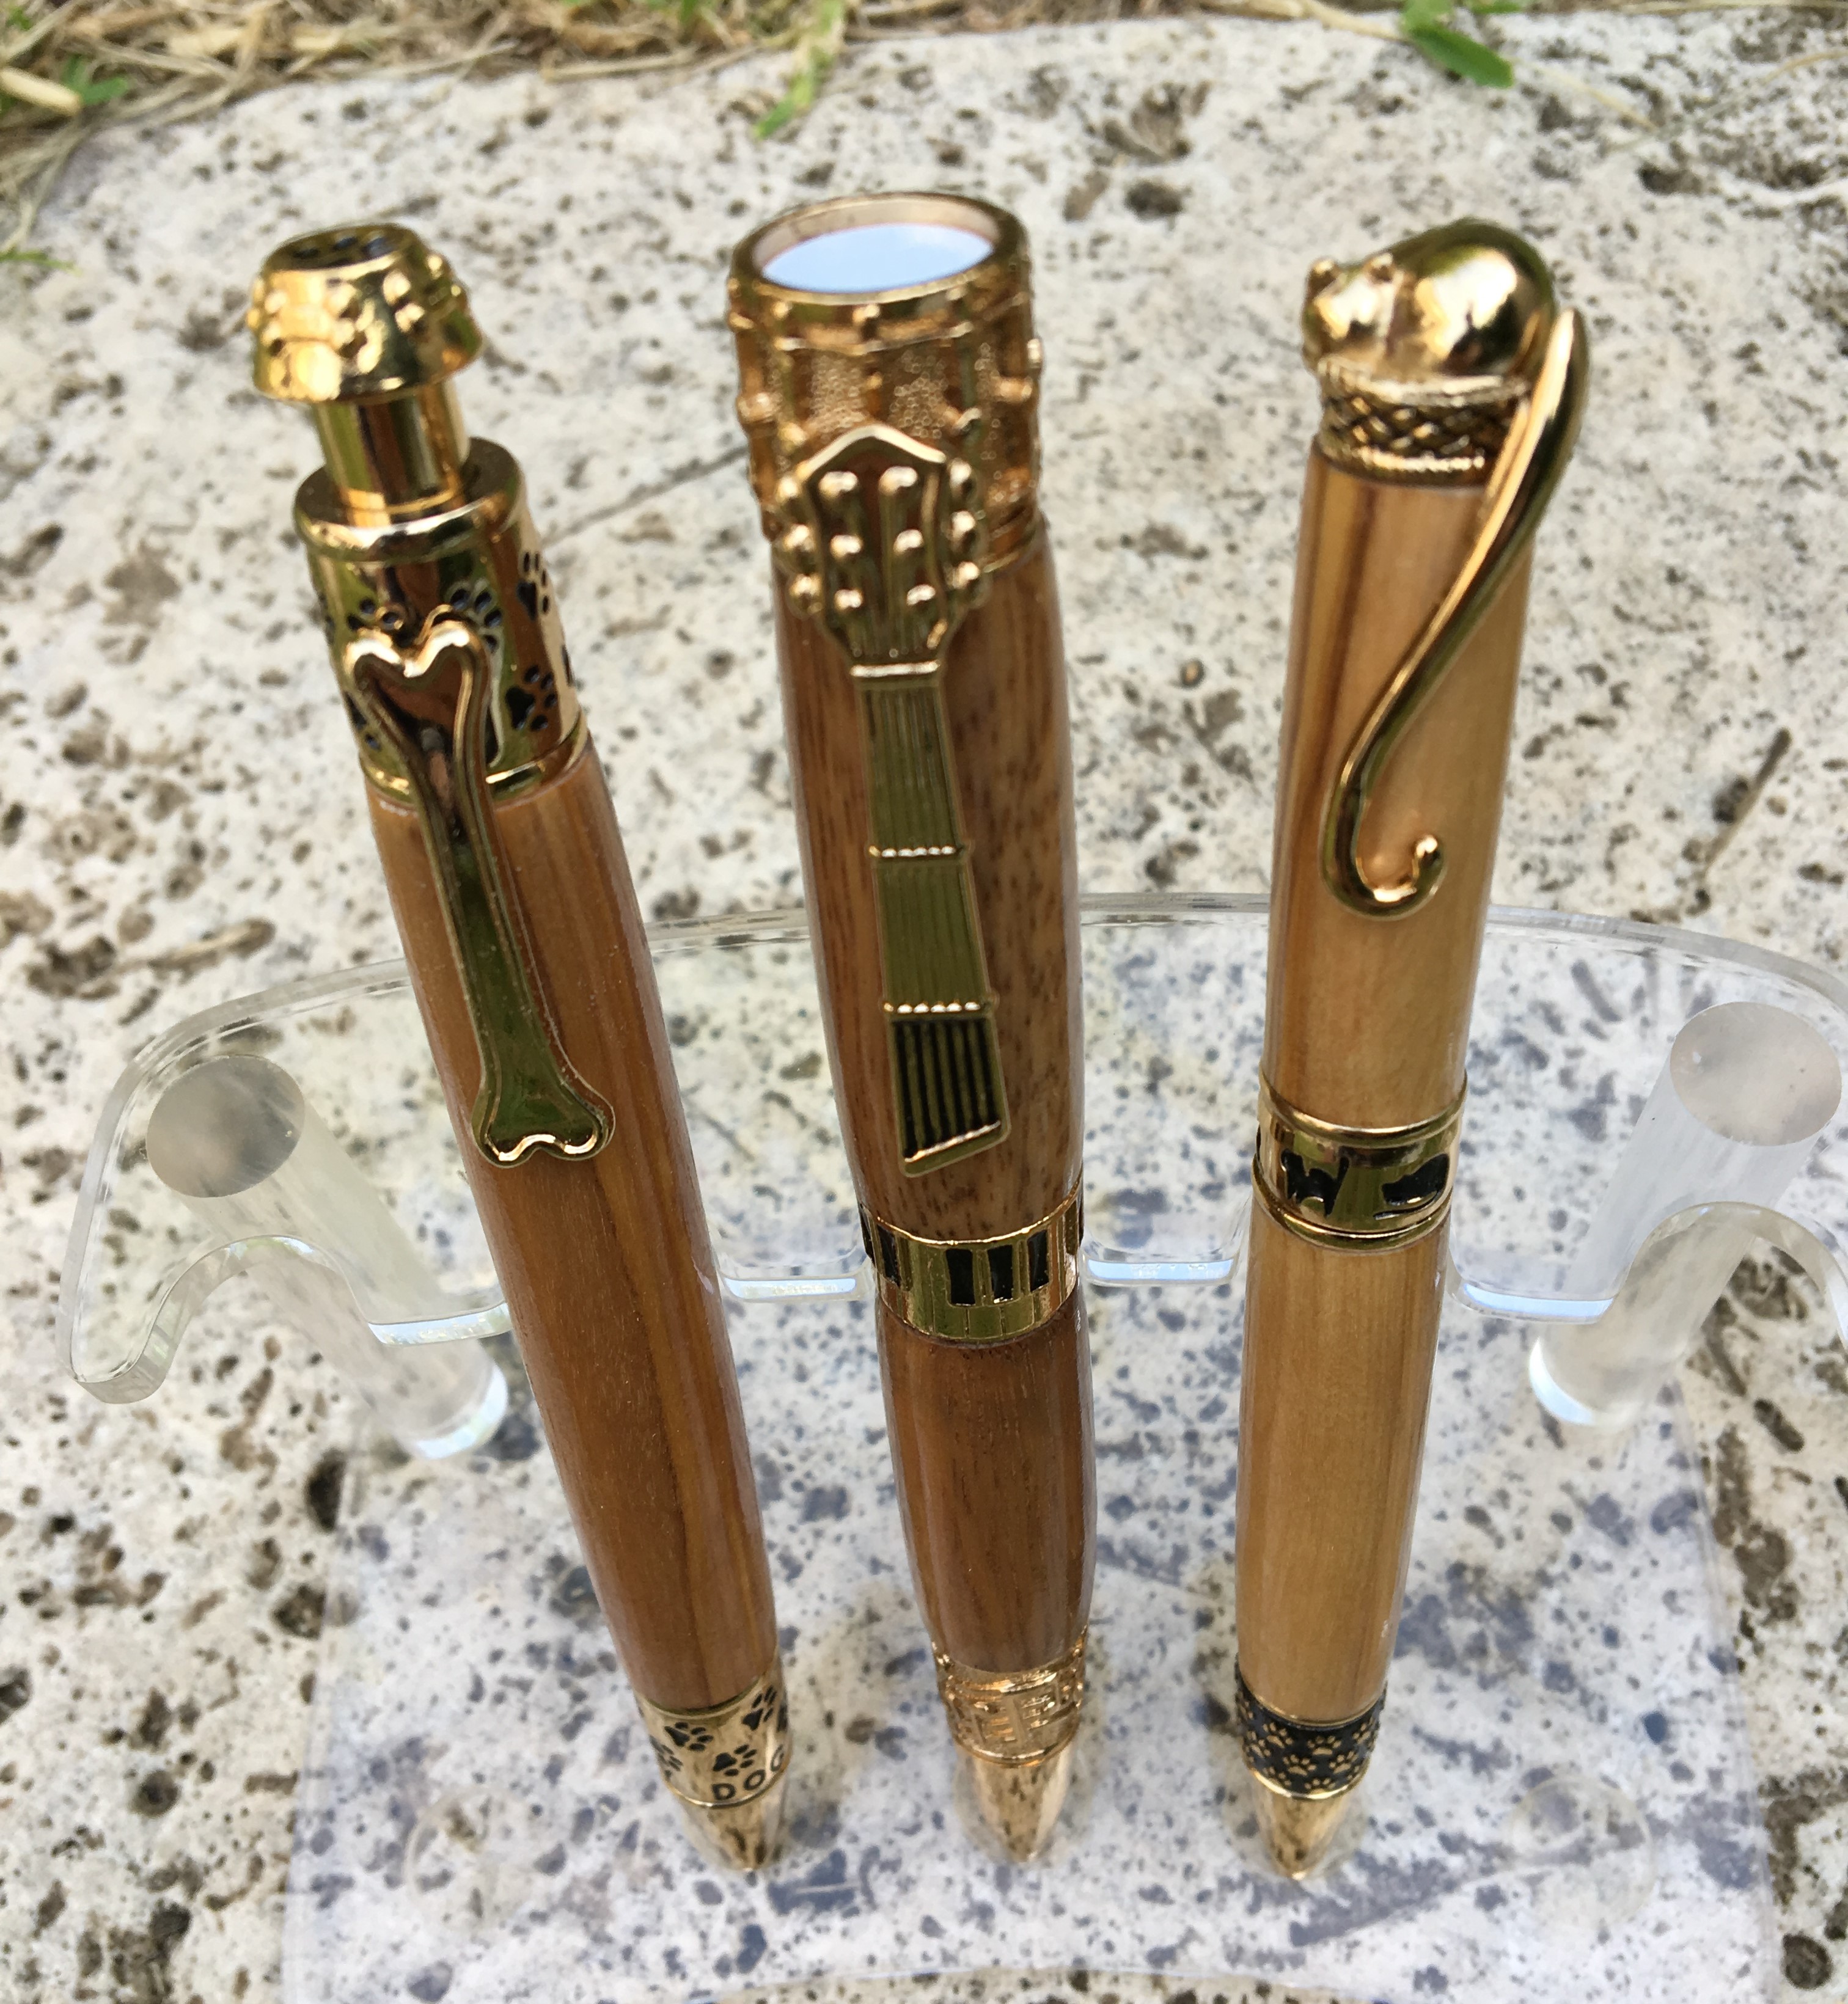 First time turning pens in awhile, six dog pen kits in a mix of